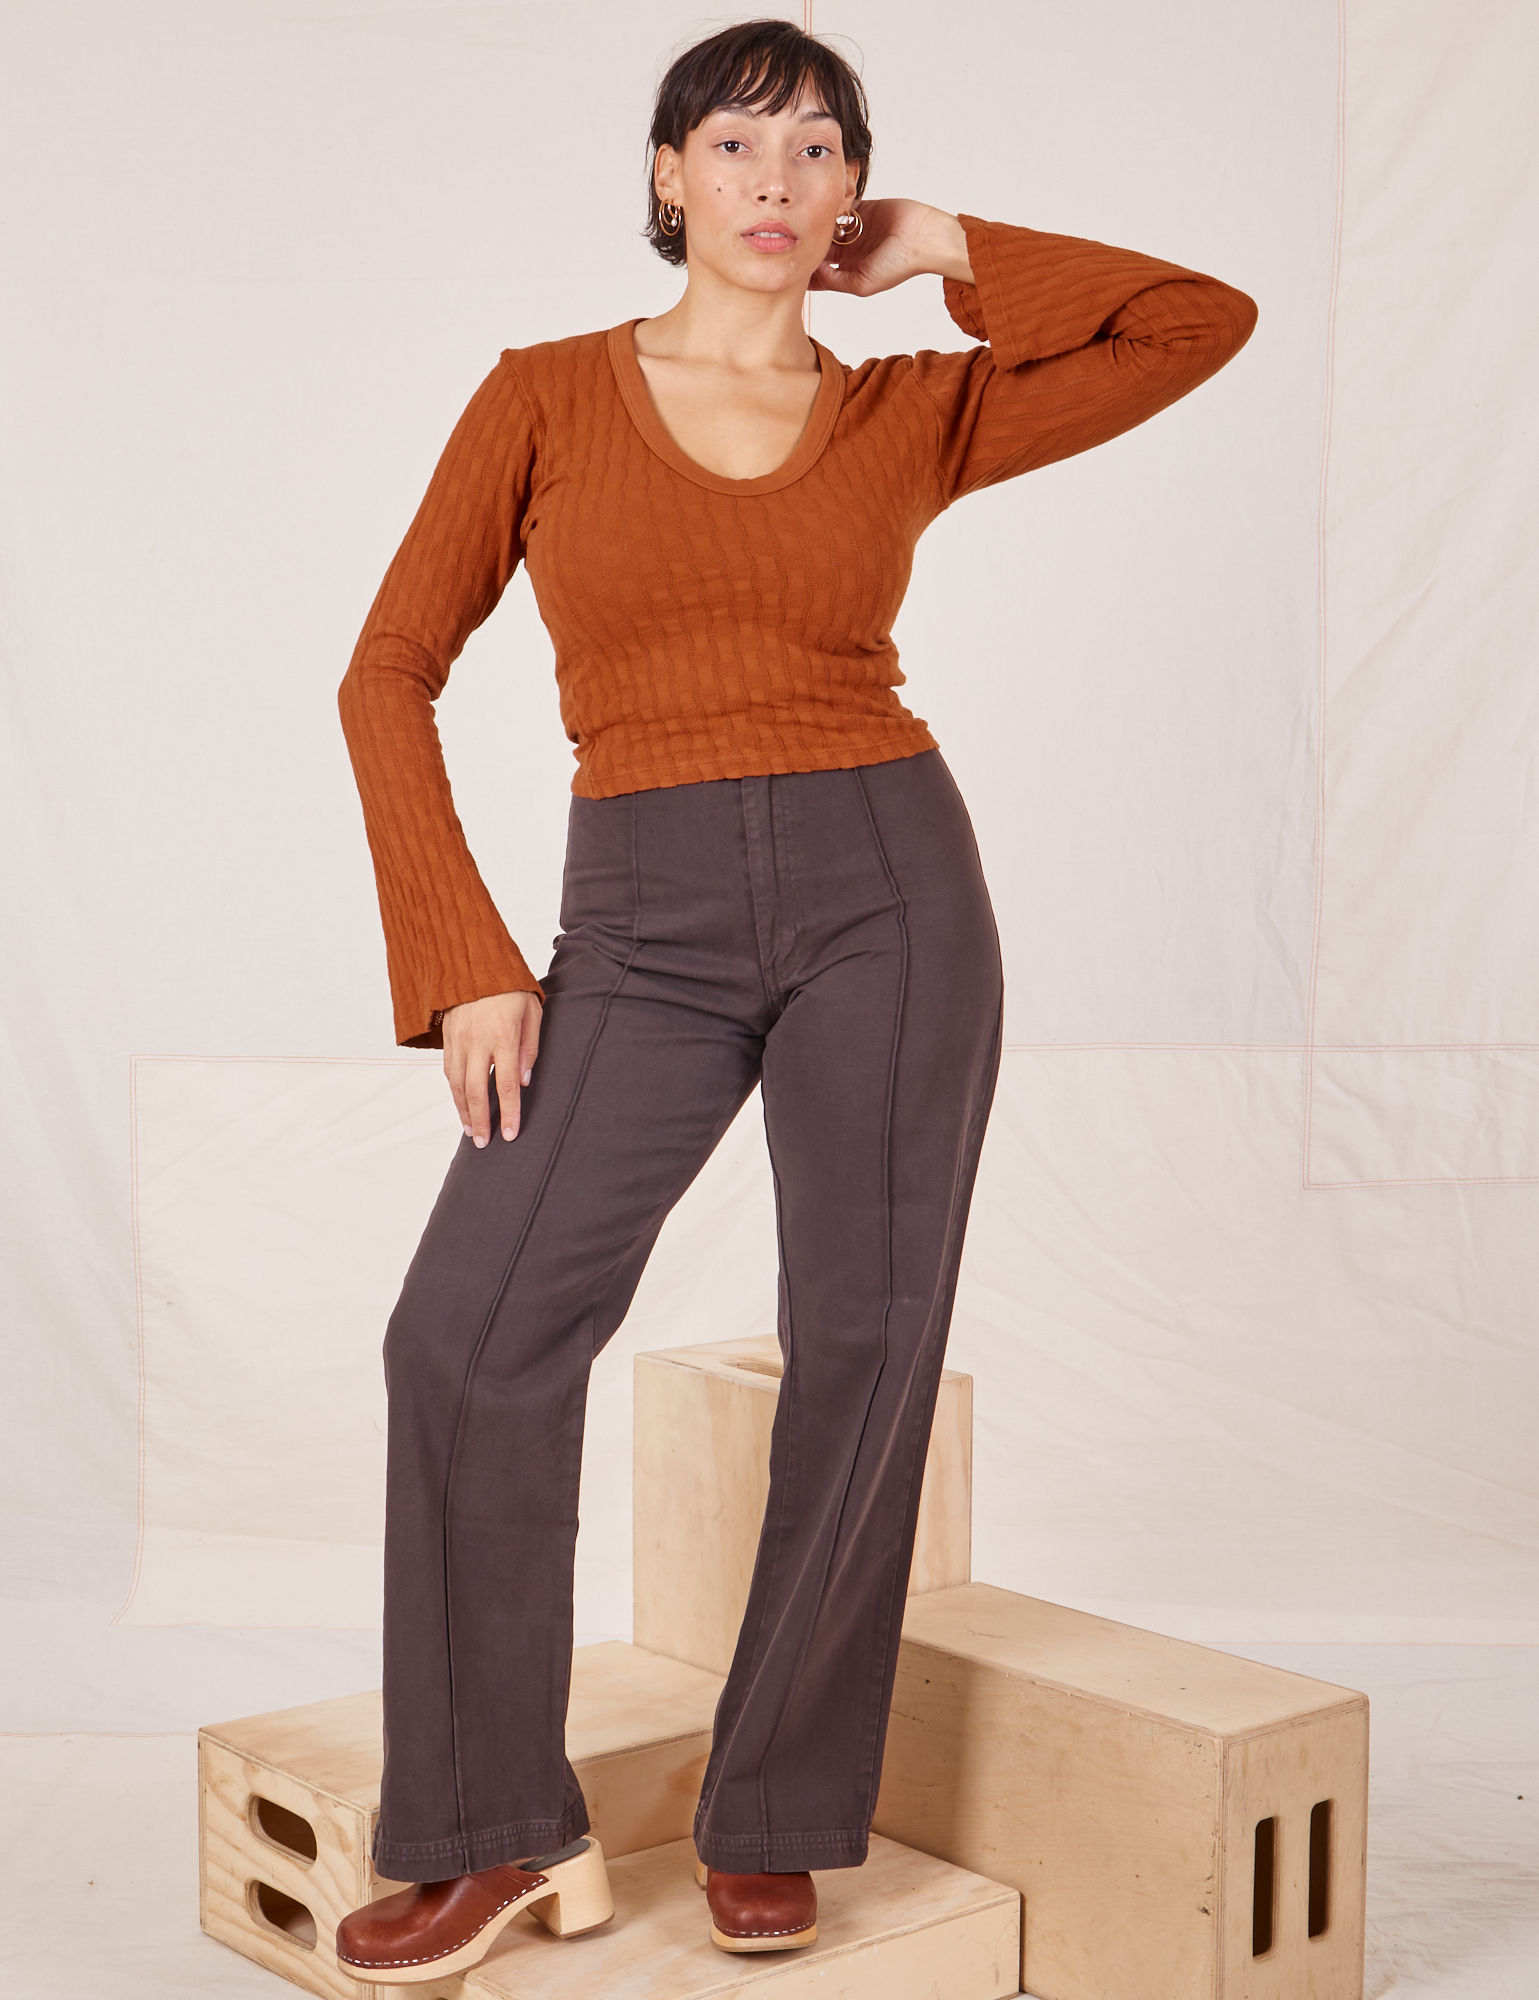 Tiara is wearing S Bell Sleeve Top in Burnt Terracotta paired with espresso brown Western Pants